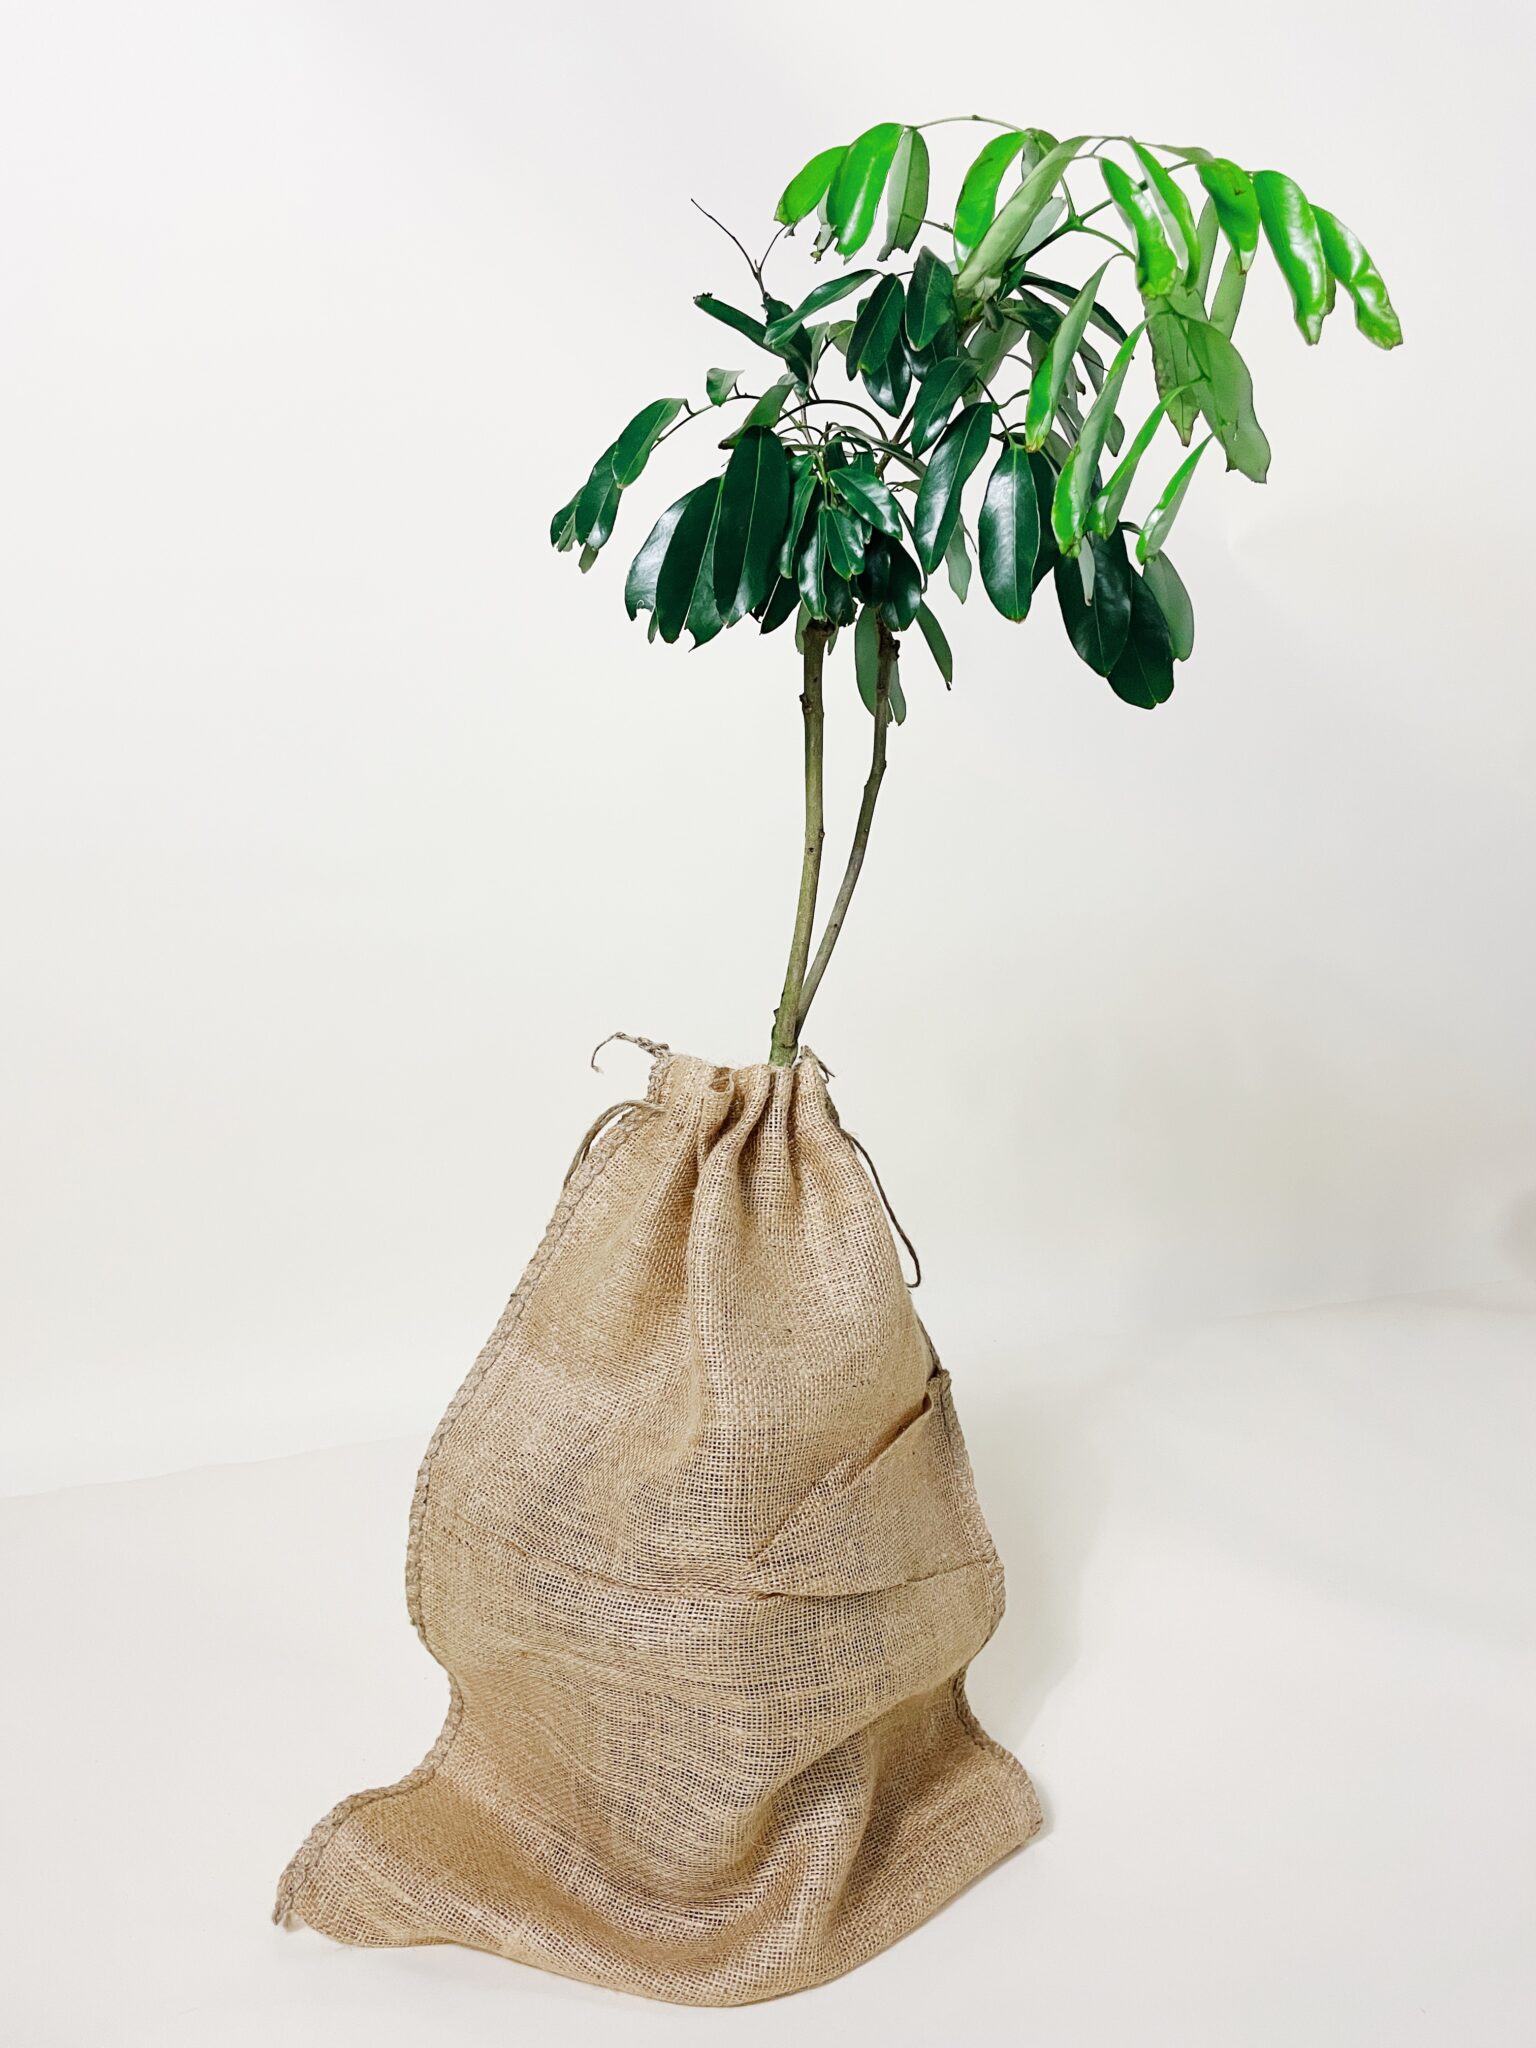 Image of Brewster Lychee Tree (Height: 1 TO 2 FT Burlap Sack: Yes)